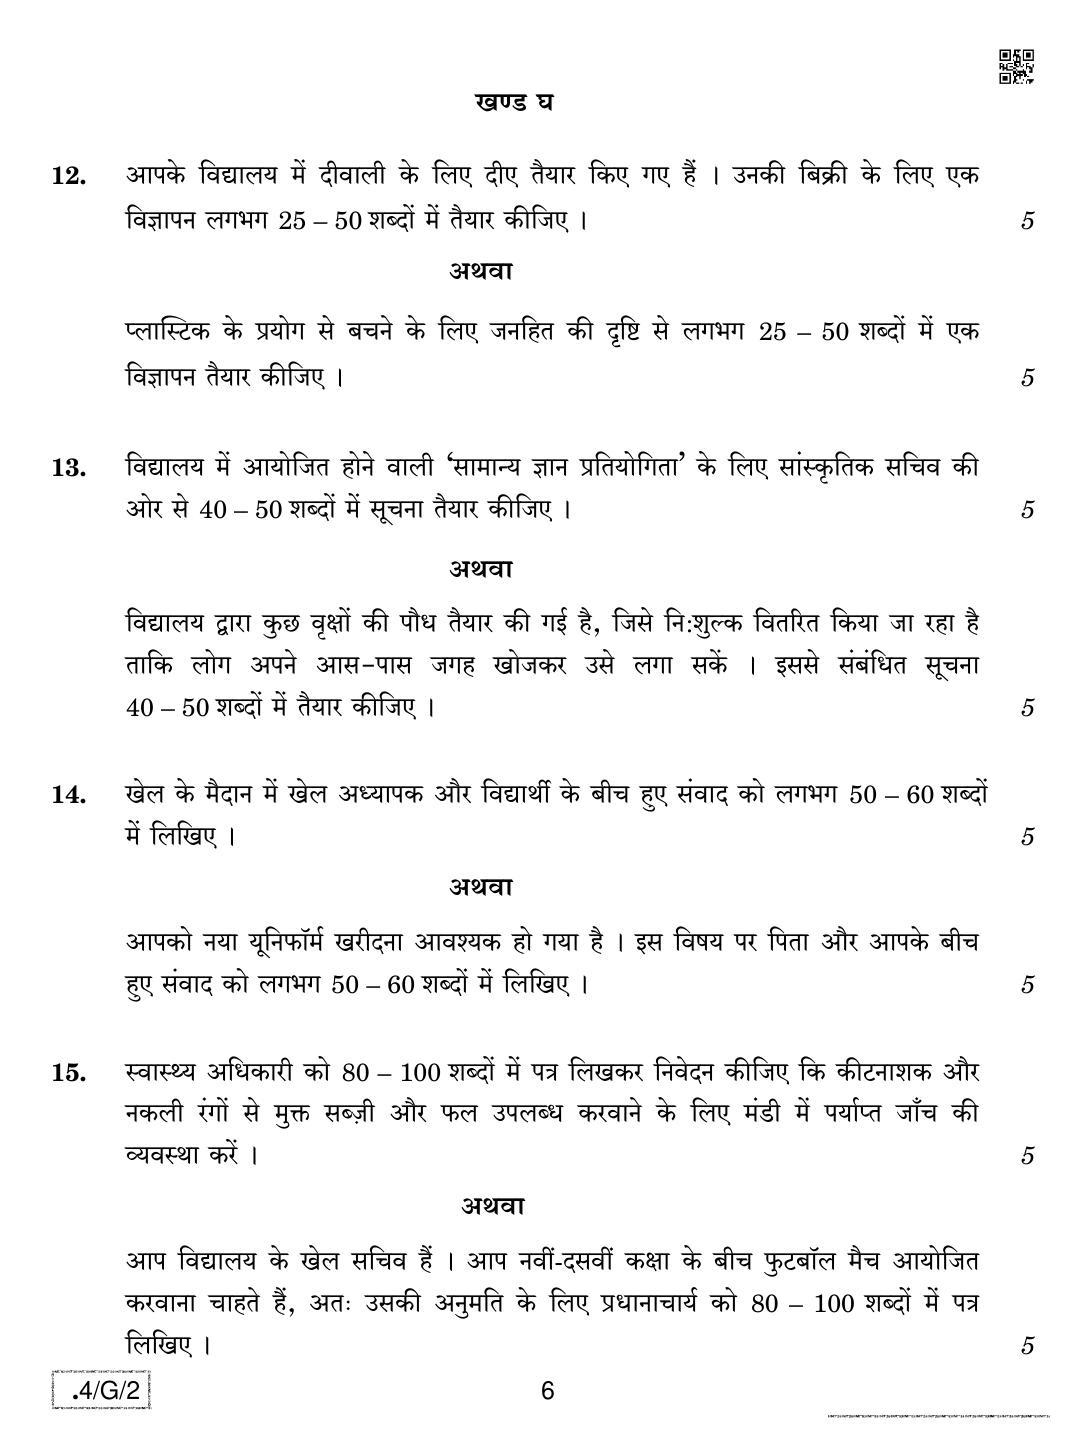 CBSE Class 10 4-C-2 Hindi B 2020 Compartment Question Paper - Page 6